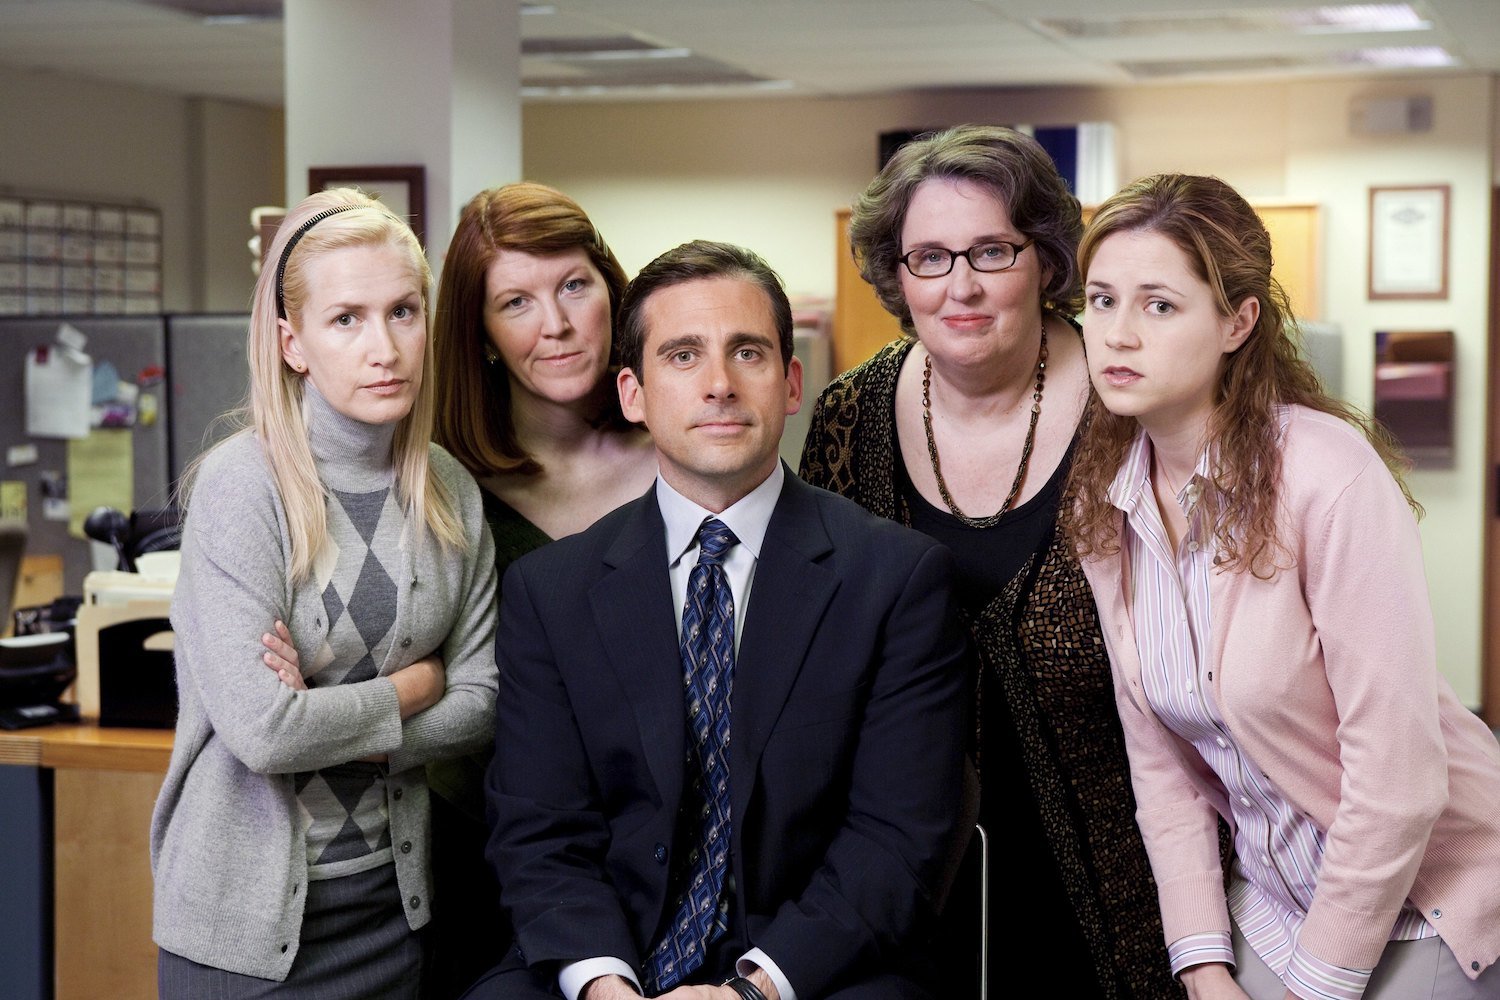 The Office: Angela Kinsey as Angela Martin, Kate Flannery as Meredith Palmer, Steve Carell as Michael Scott, Phyllis Smith as Phyllis Lapin, and Jenna Fischer as Pam Beesly